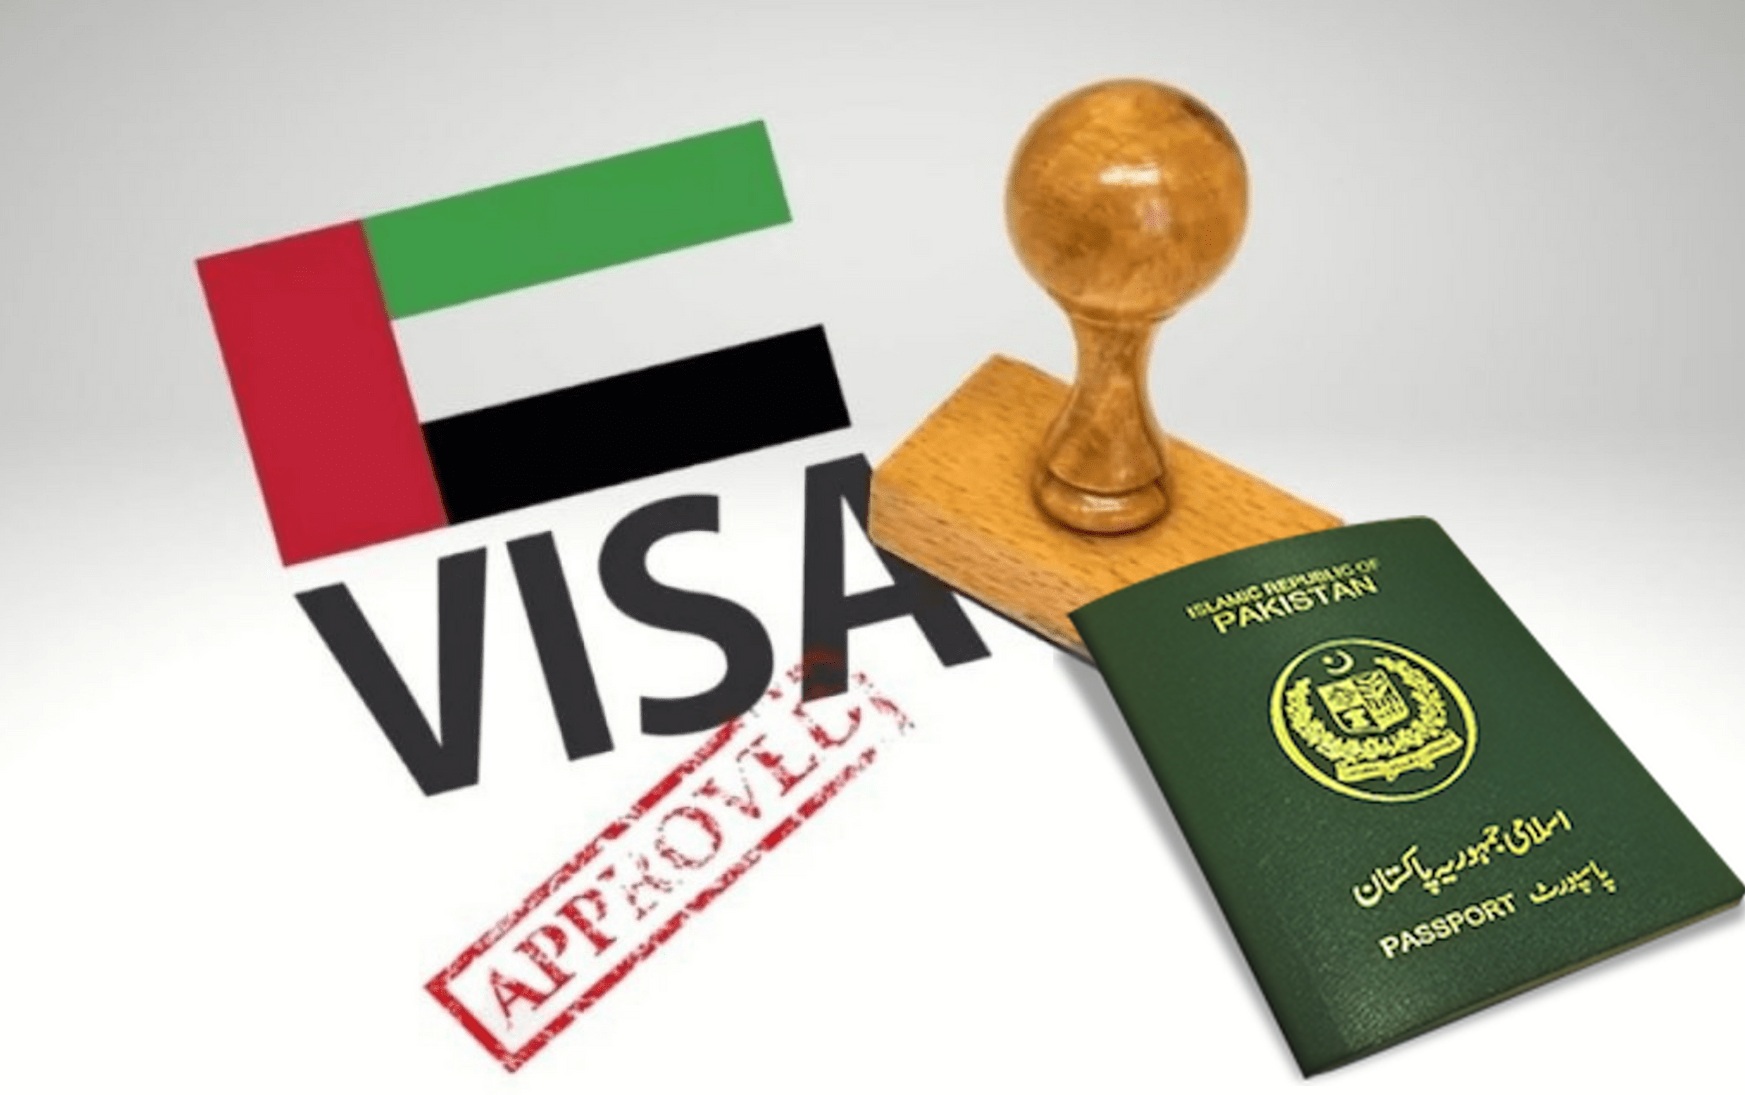 uae visit visa fees for 2 months from pakistan